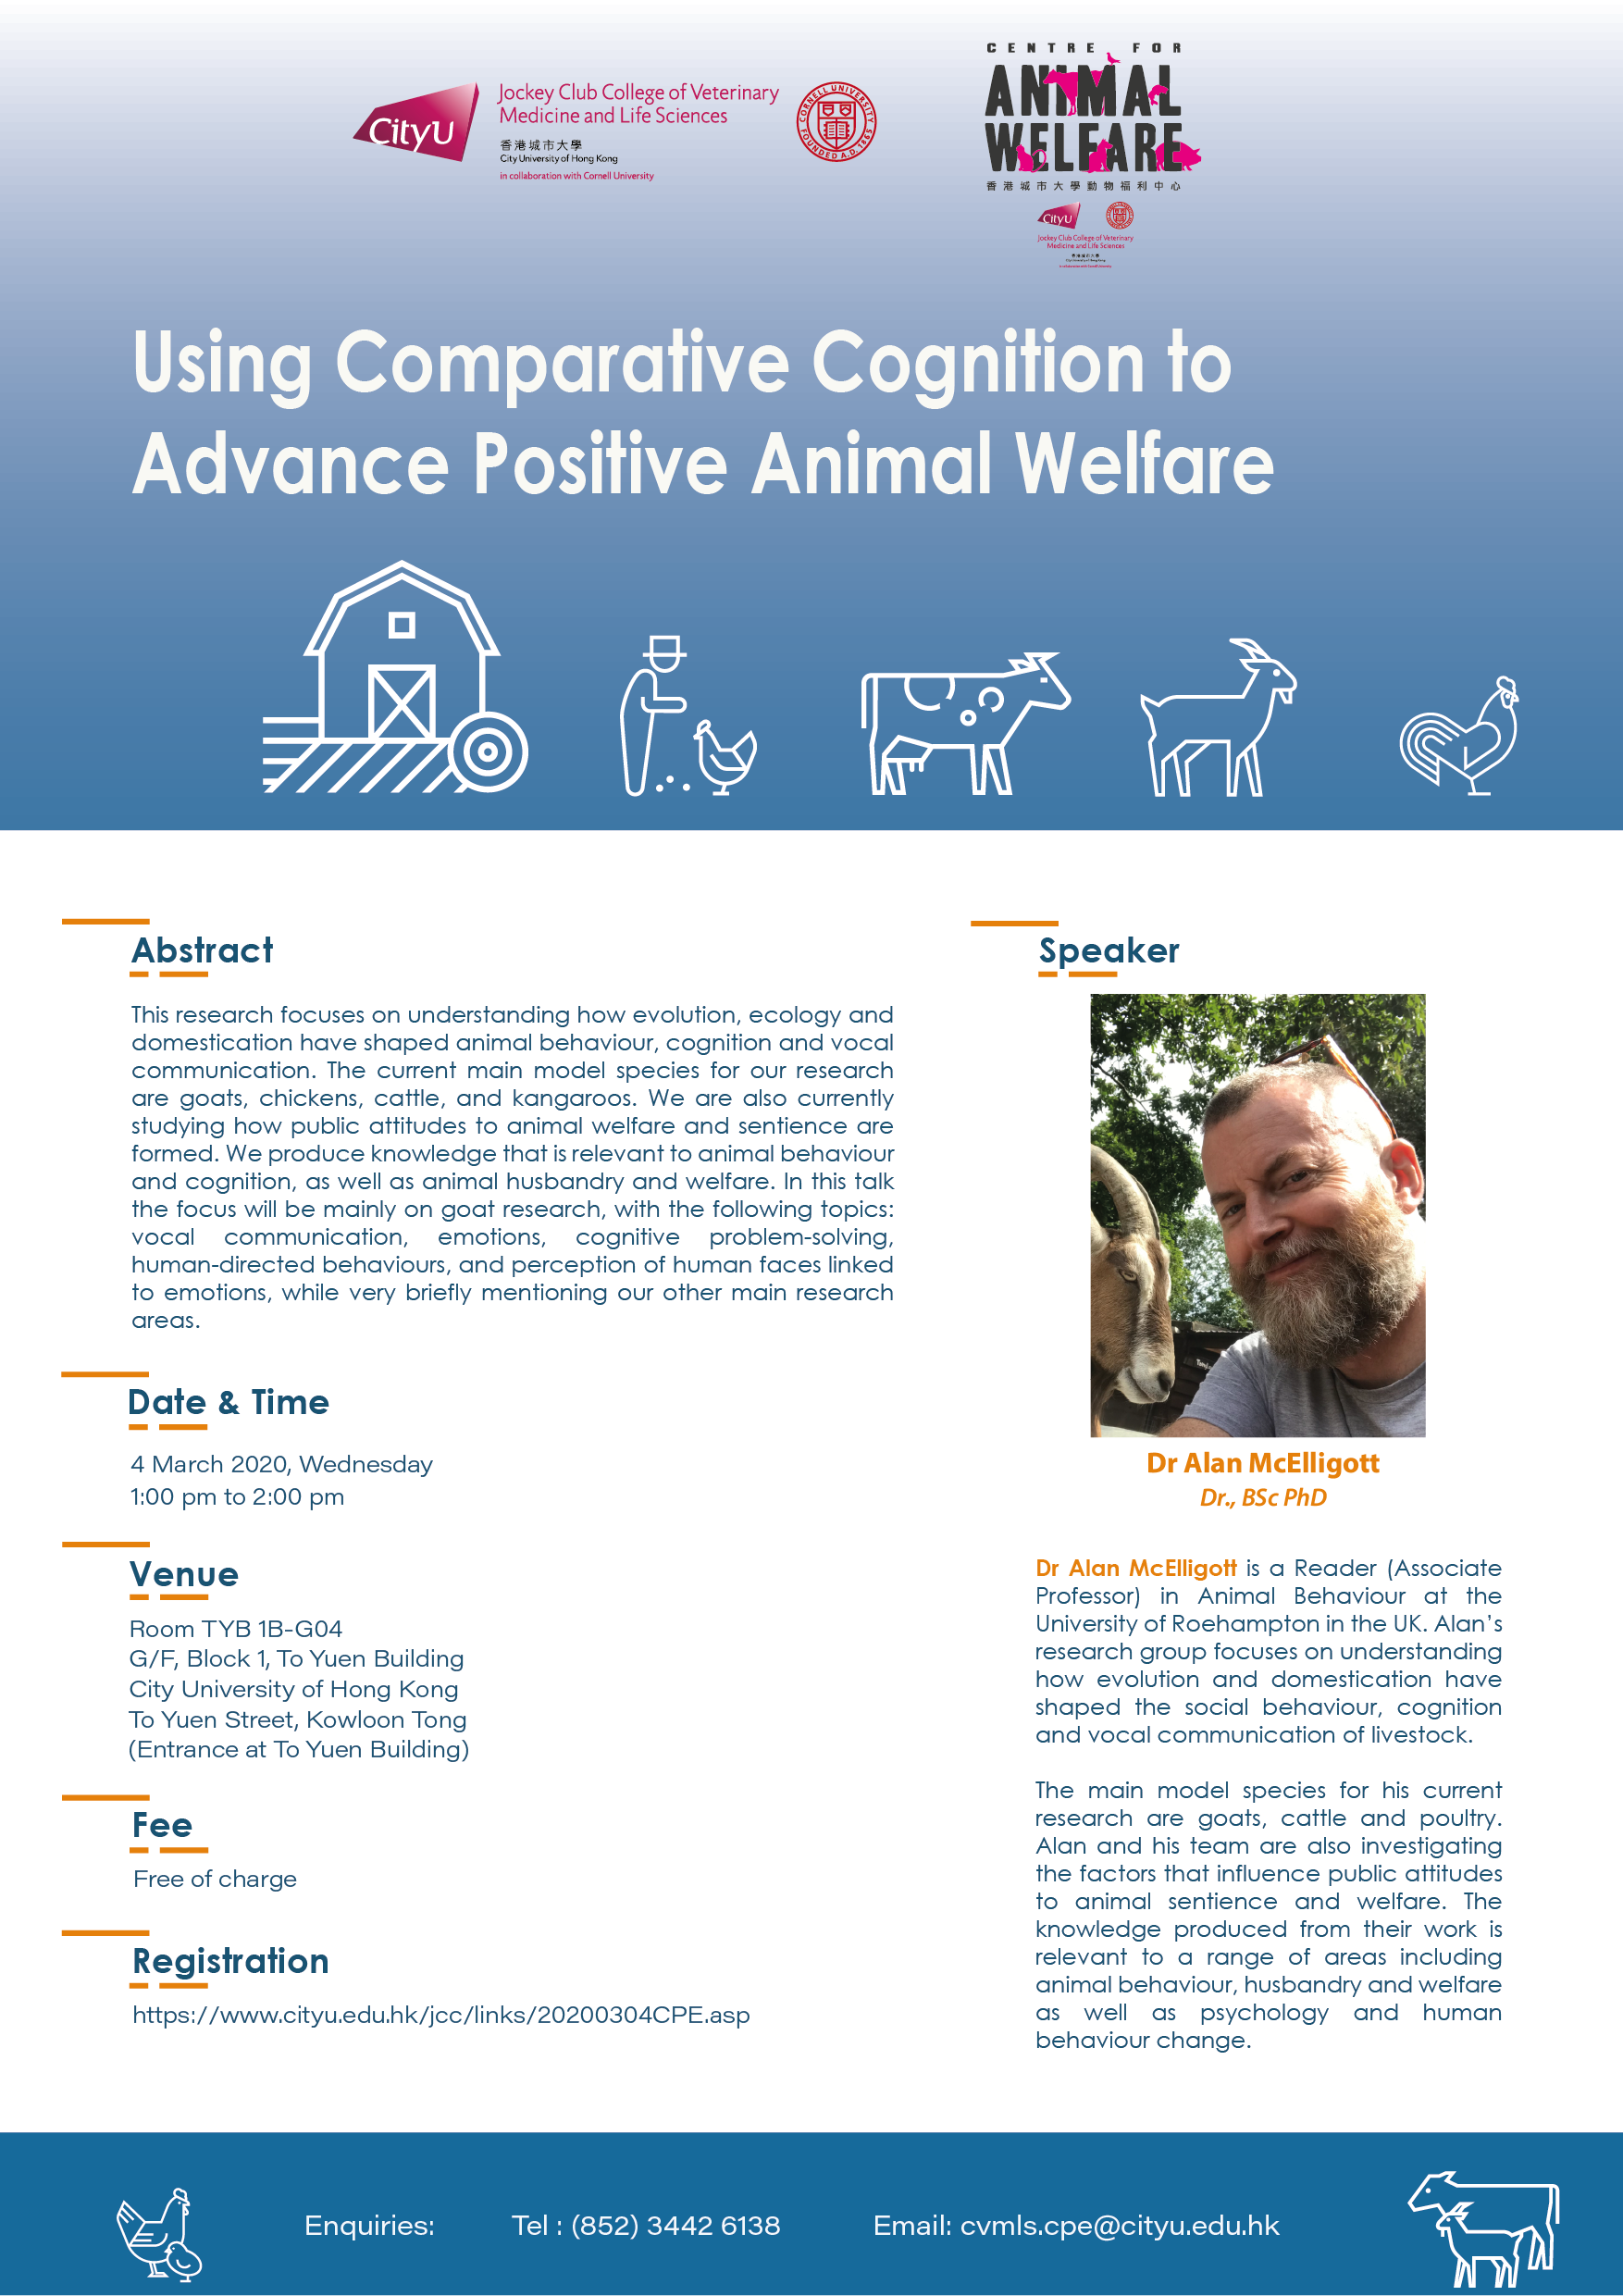 Using Comparative Cognition to Advance Positive Animal Welfare